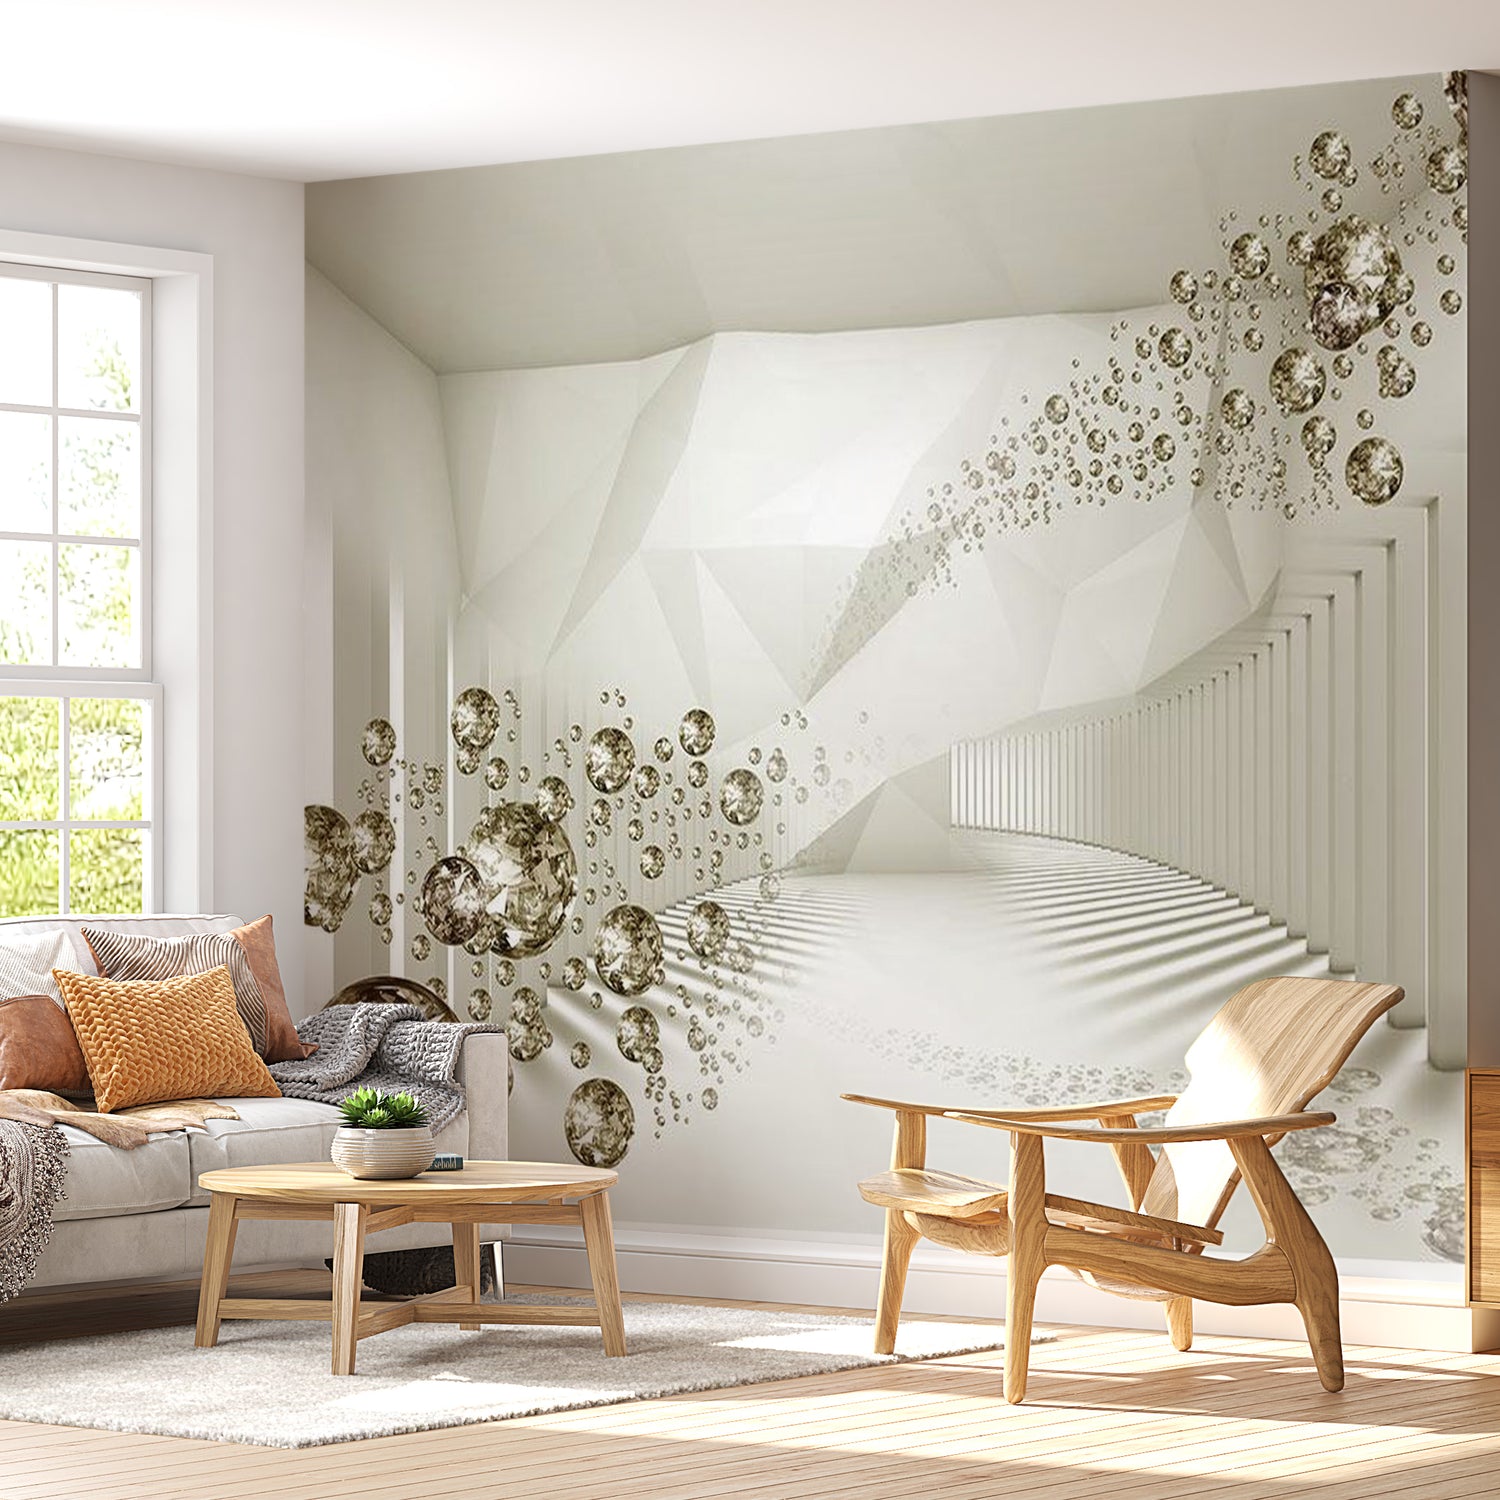 Peel & Stick 3D Illusion Wall Mural - Diamond Corridor Beige - Removable Wall Decals